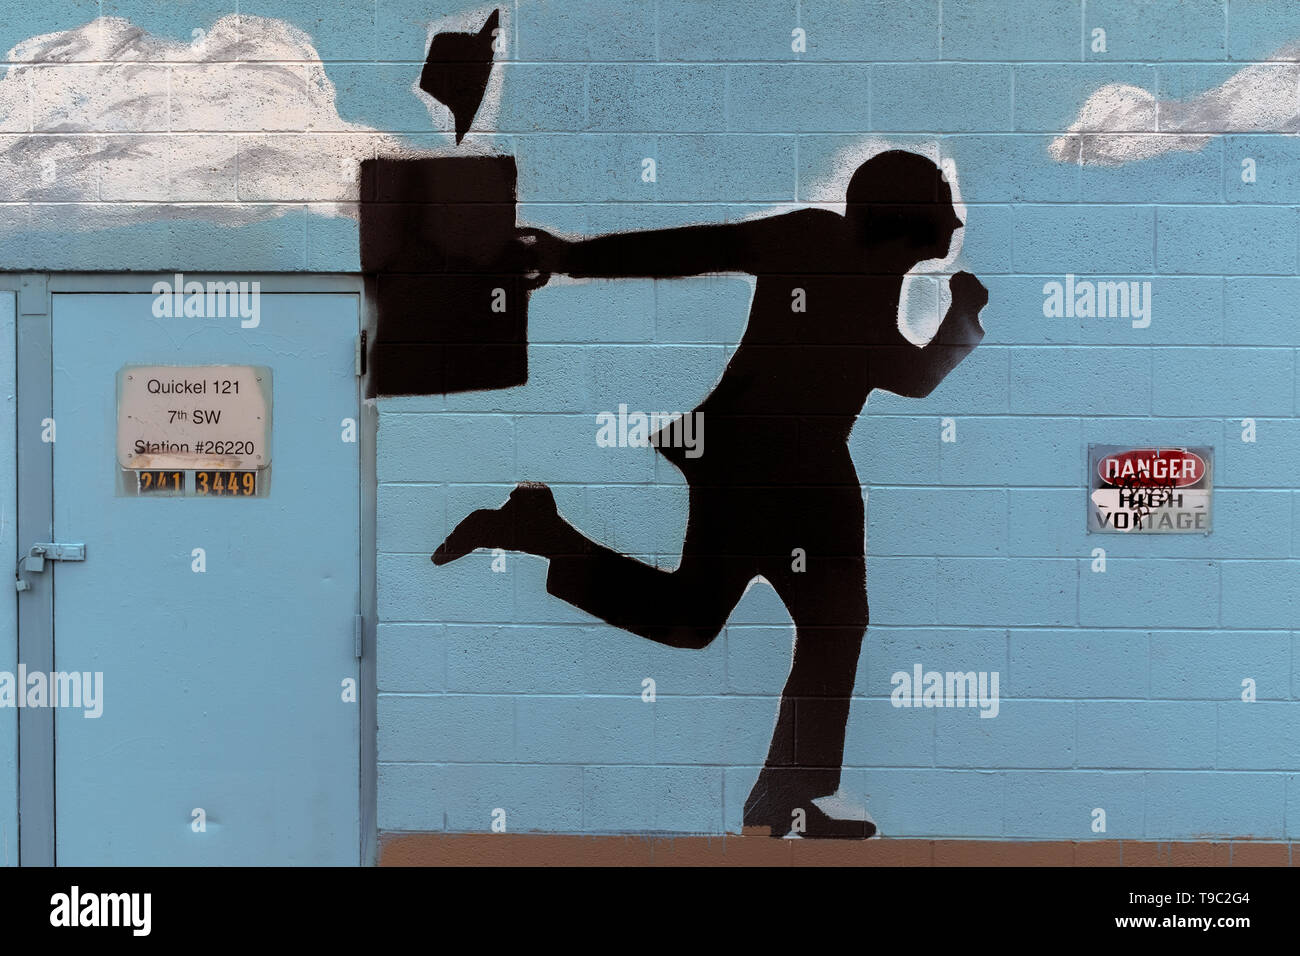 mural depicting 'dashing commuter' in silhouette Stock Photo